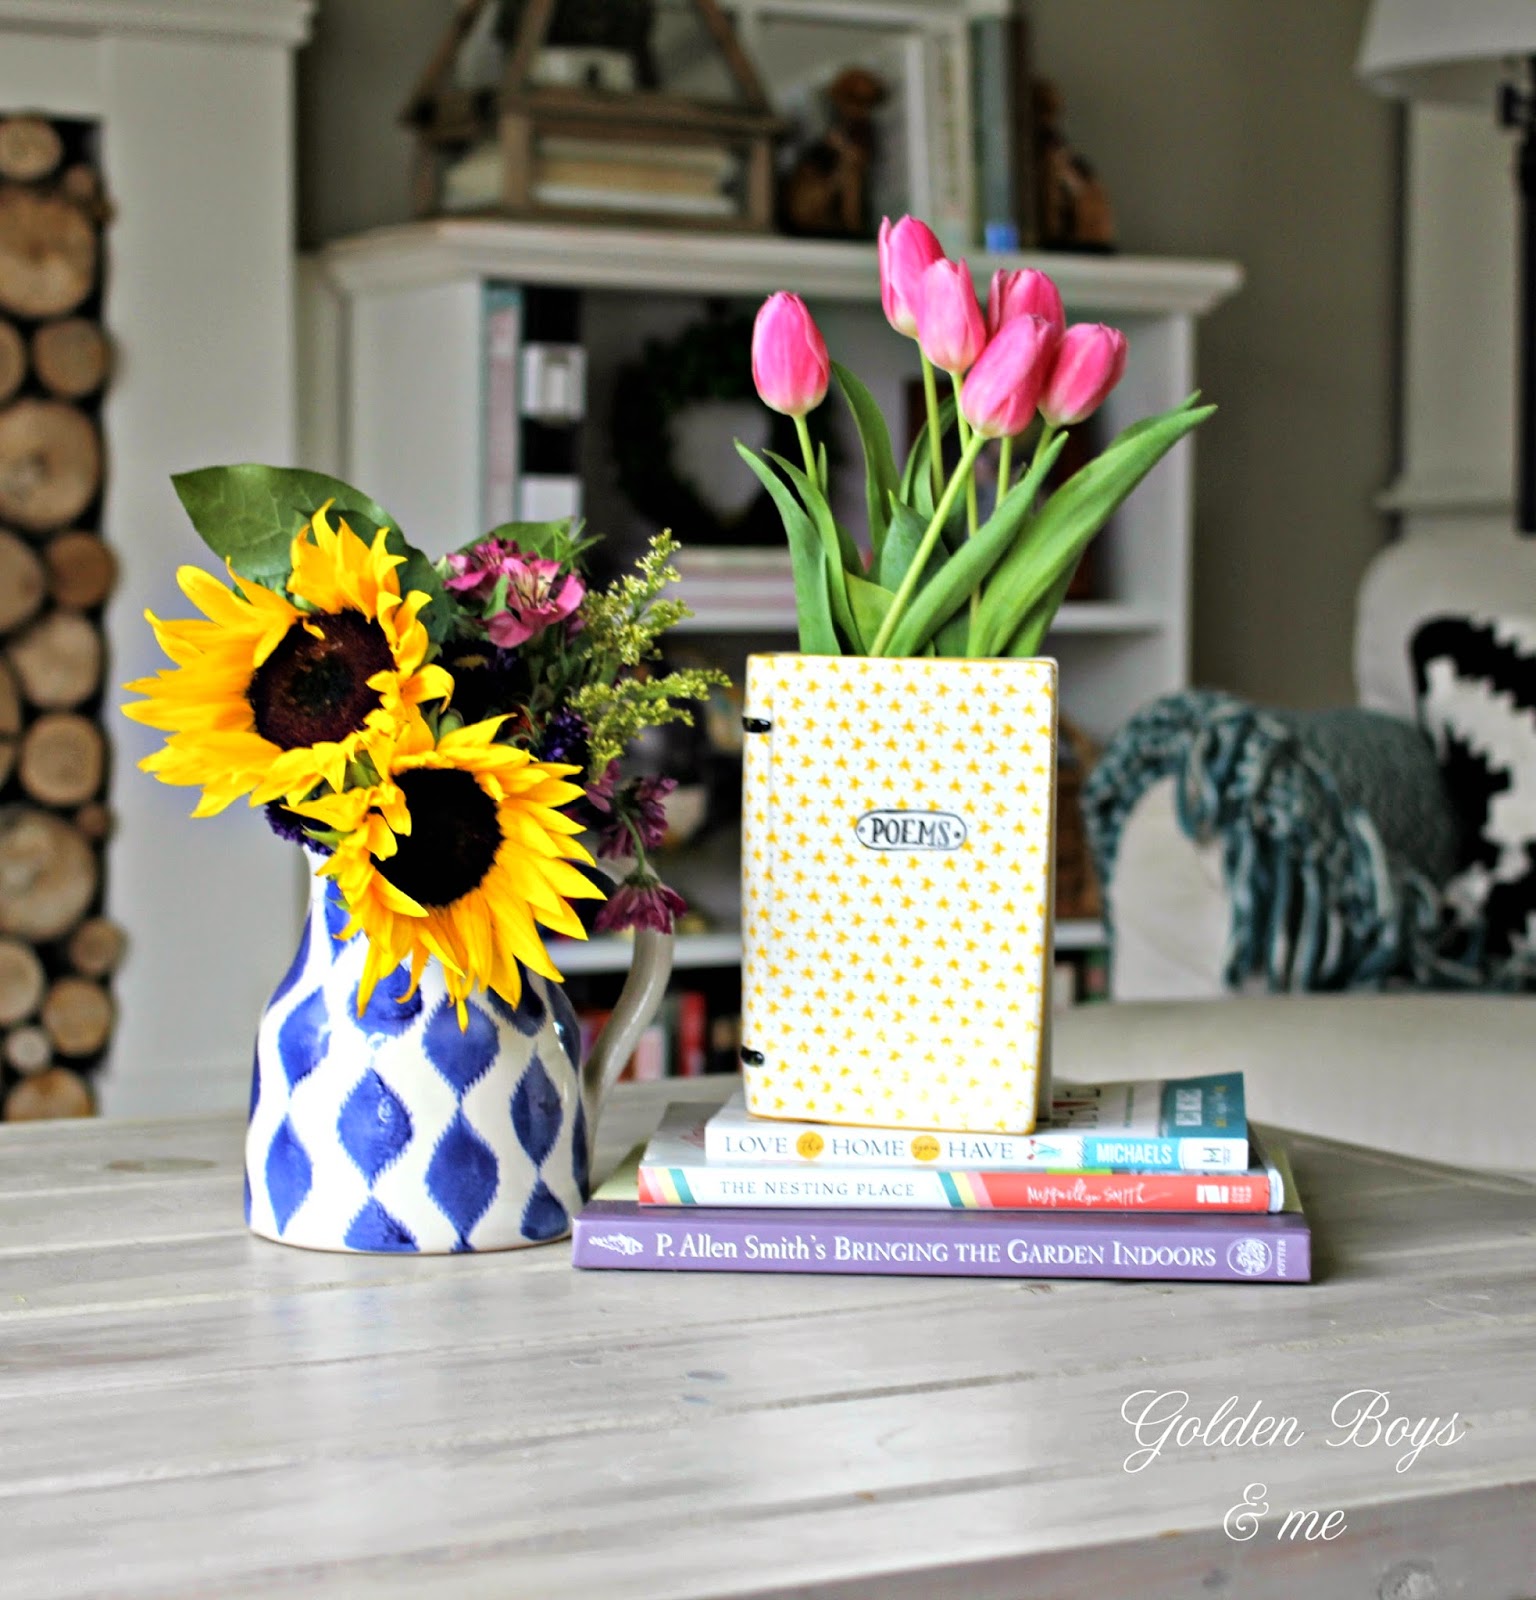 Poems verses vase from Anthropologie with spring tulips-www.goldenboysandme.com